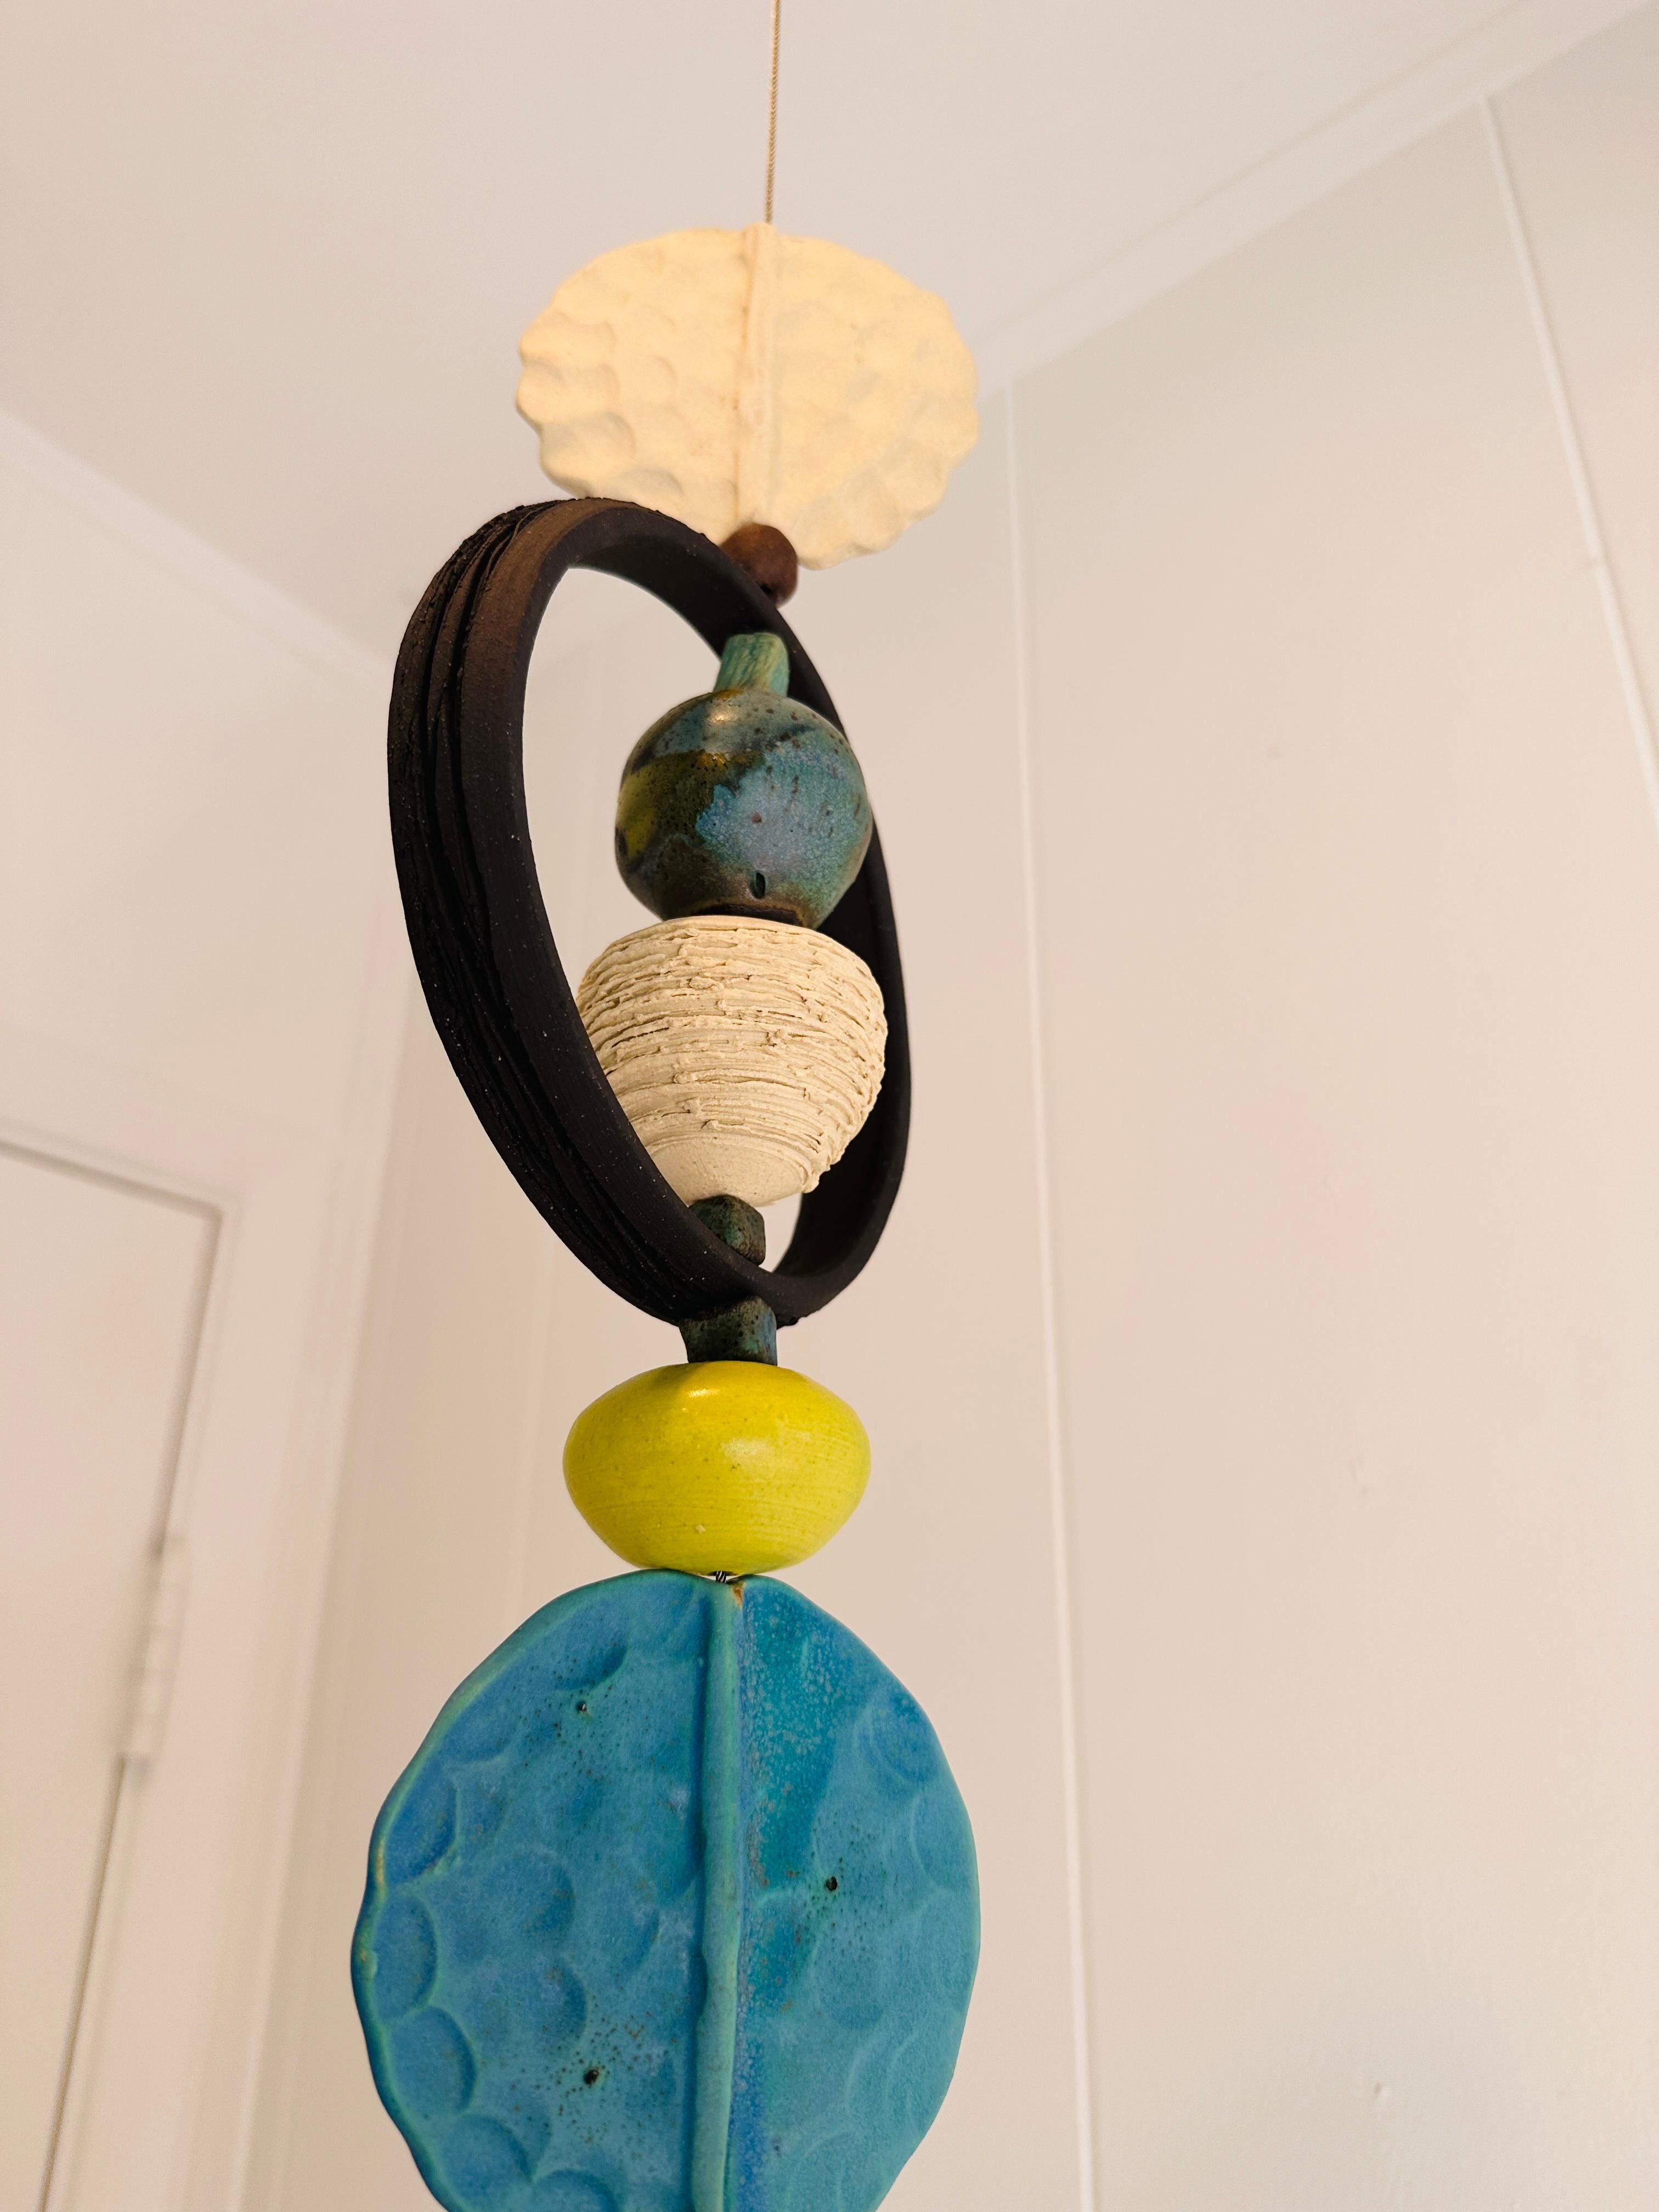 Contemporary Monumental Ceramic Kinetic hanging sculpture hand crafted by Brenda Williams